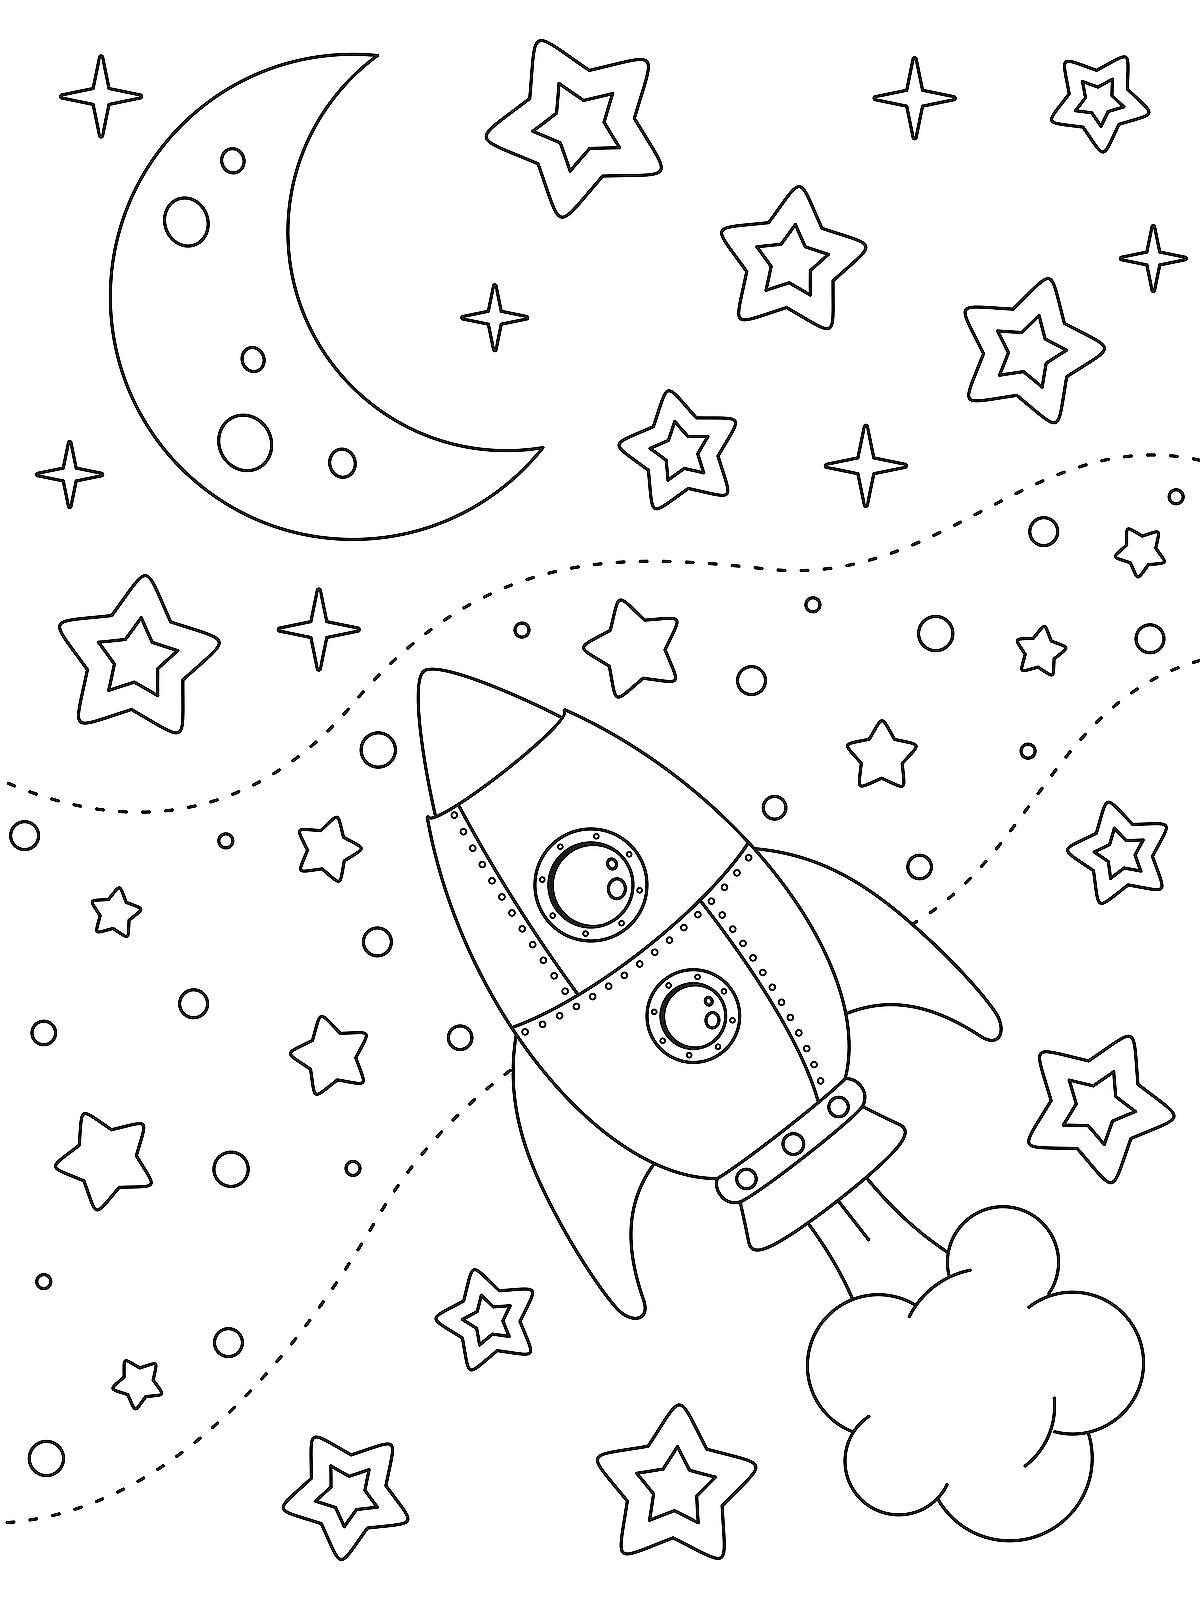 Outer space coloring pages for kids free printable coloring pages for kids that are out of this world printables mom